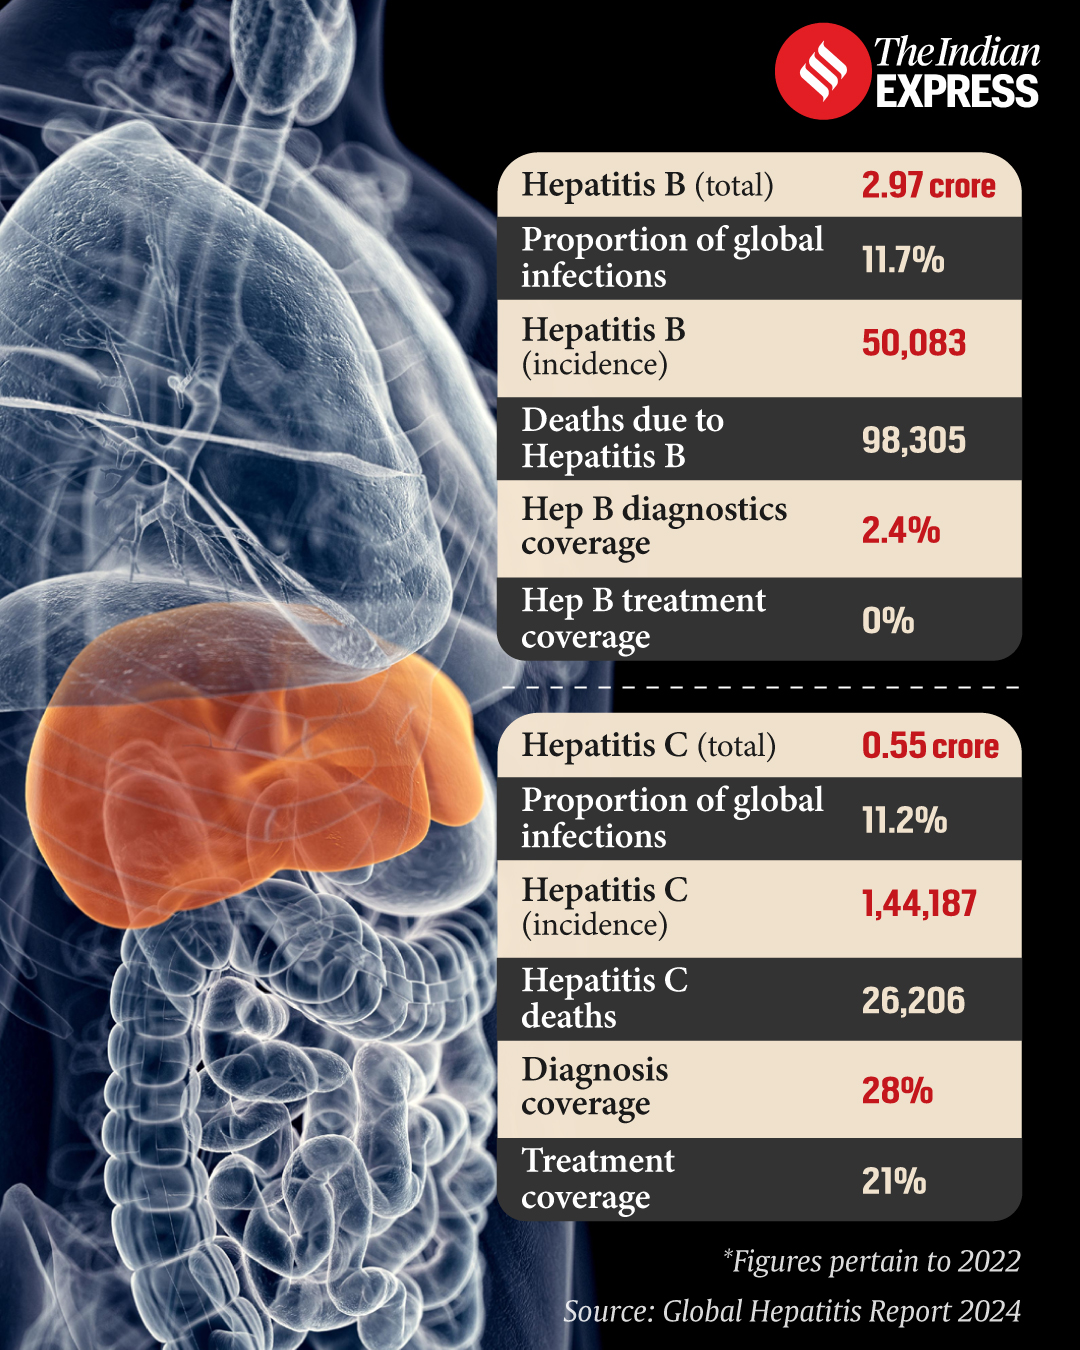 Globally, with nearly 1.3 million deaths a year, viral hepatitis kills as many people as tuberculosis.